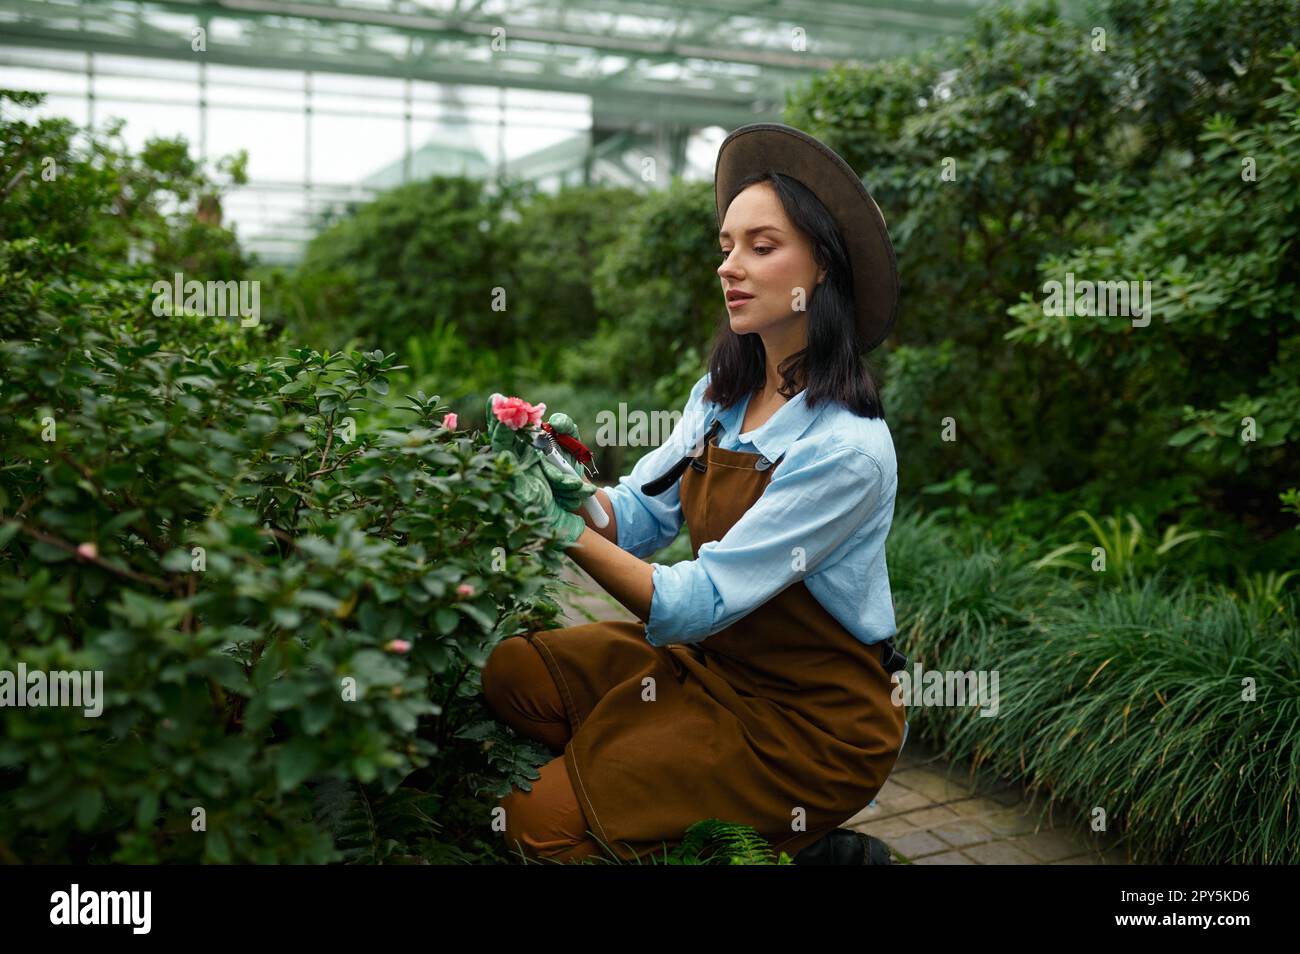 Young woman gardener cutting flower buds working in greenhouse Stock Photo